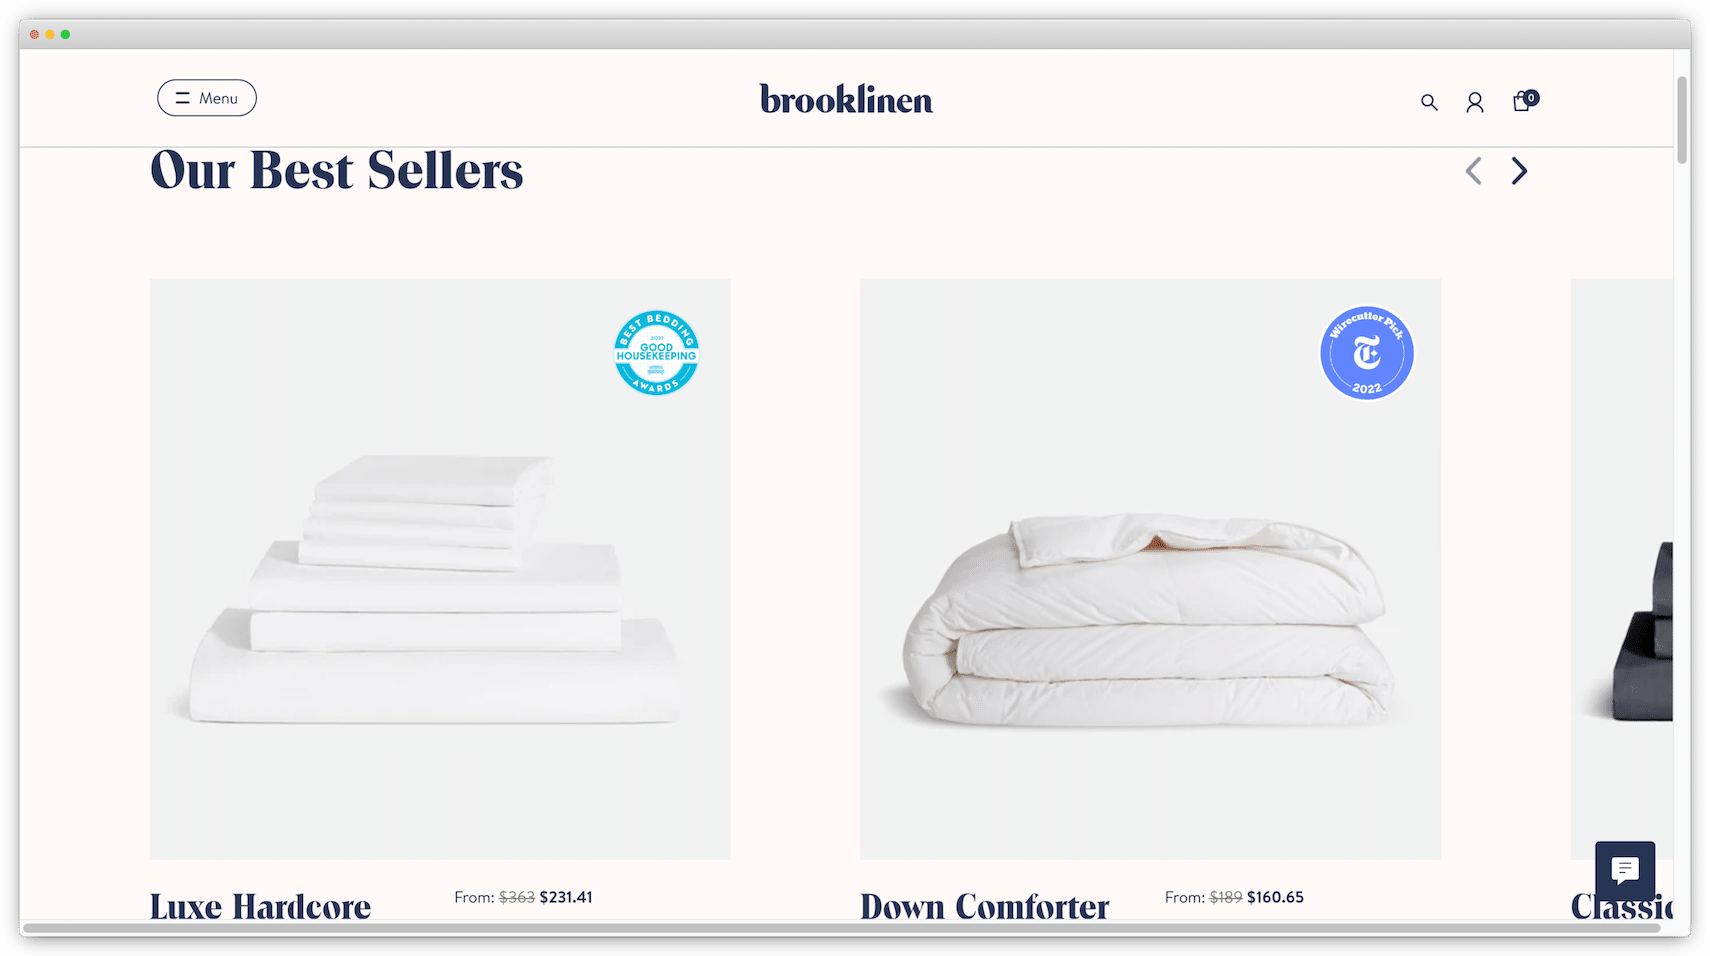 The second example of a successful dropshipping store is Brooklinen.